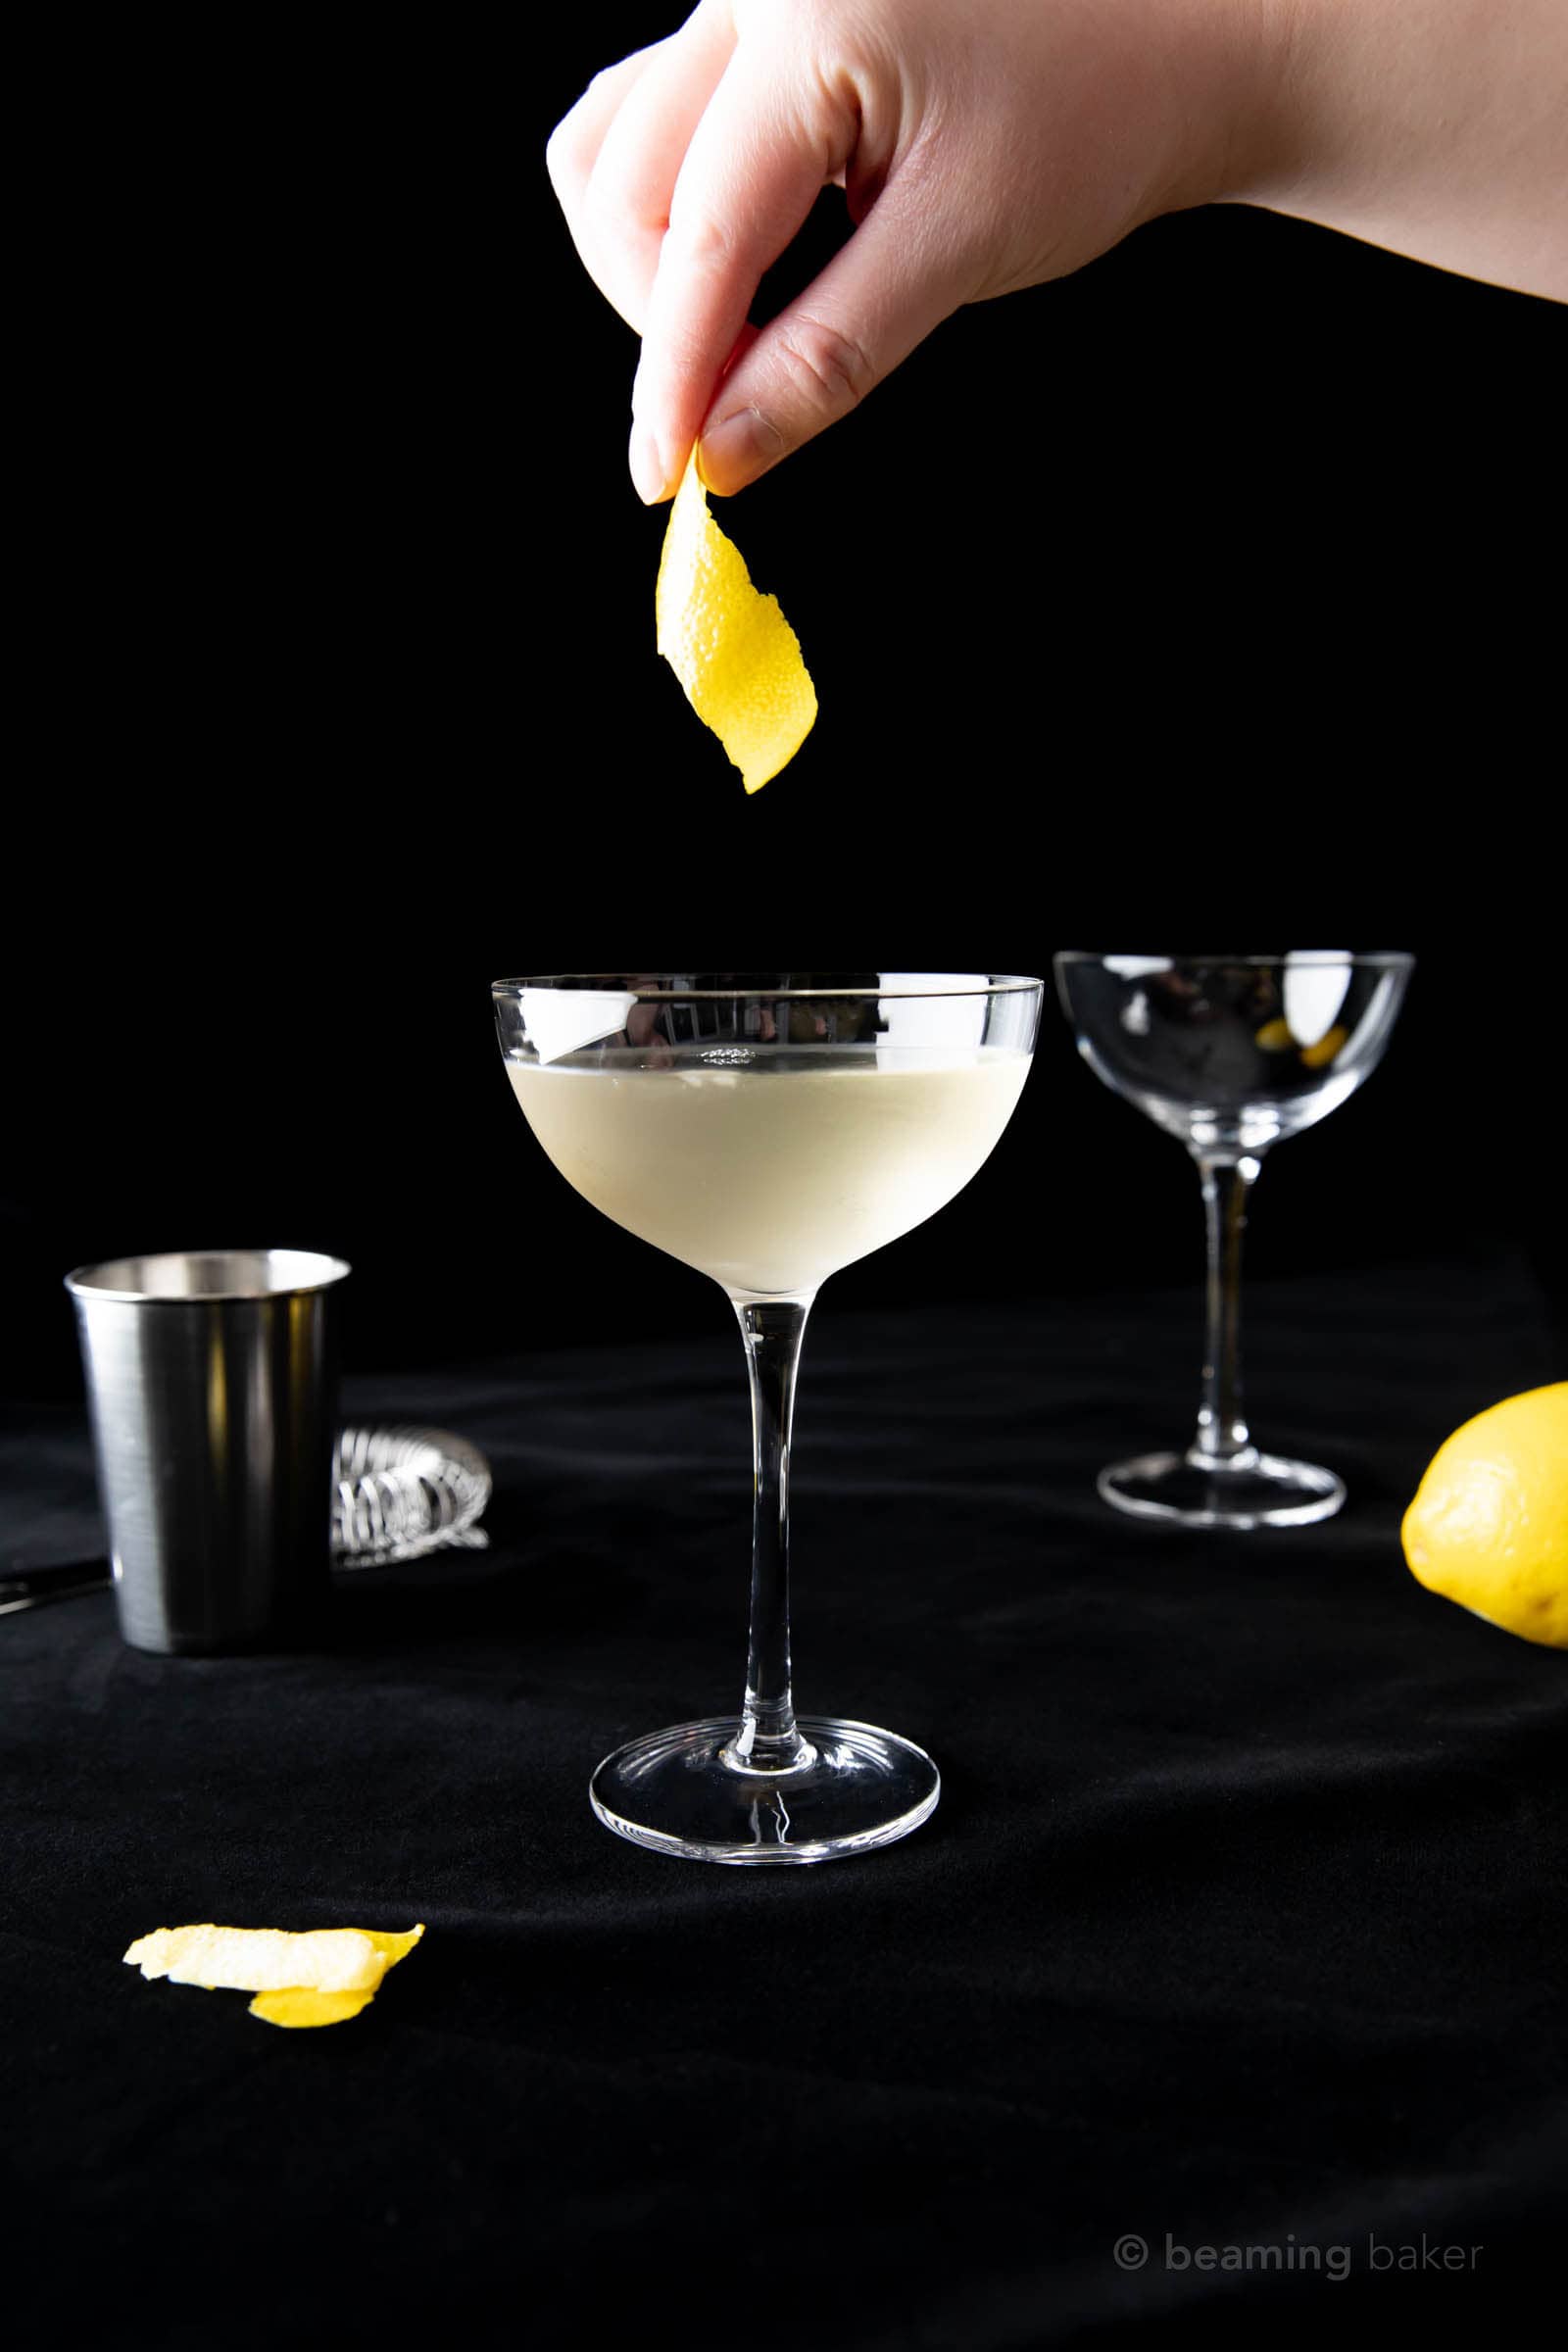 Hand dropping a lemon peel into the rim of a coupe glass to finish off the martini